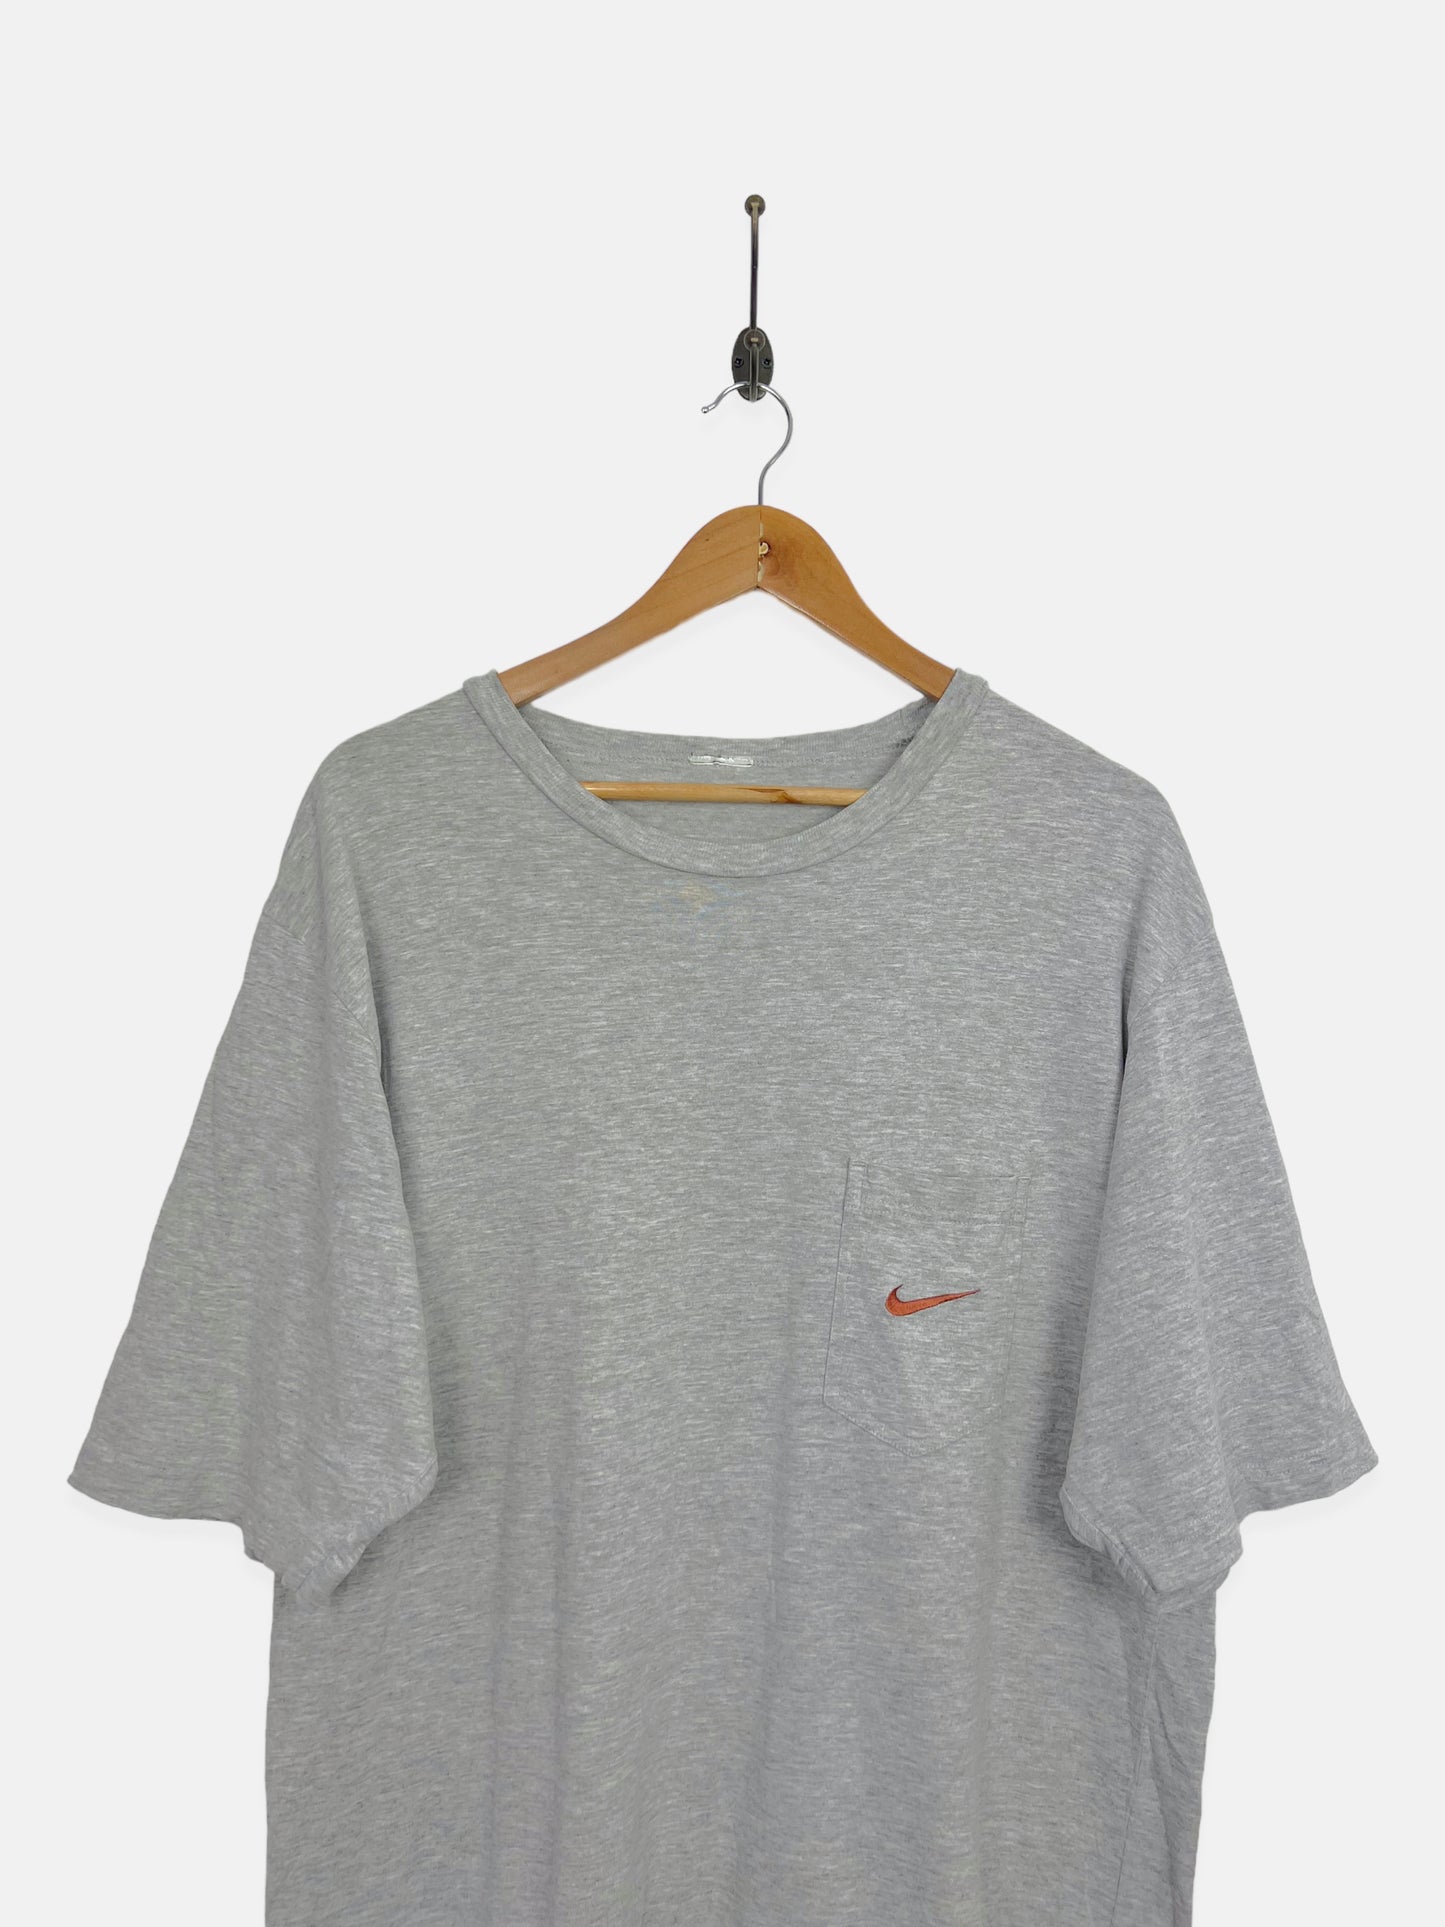 90's Nike Embroidered Vintage T-Shirt Size XL